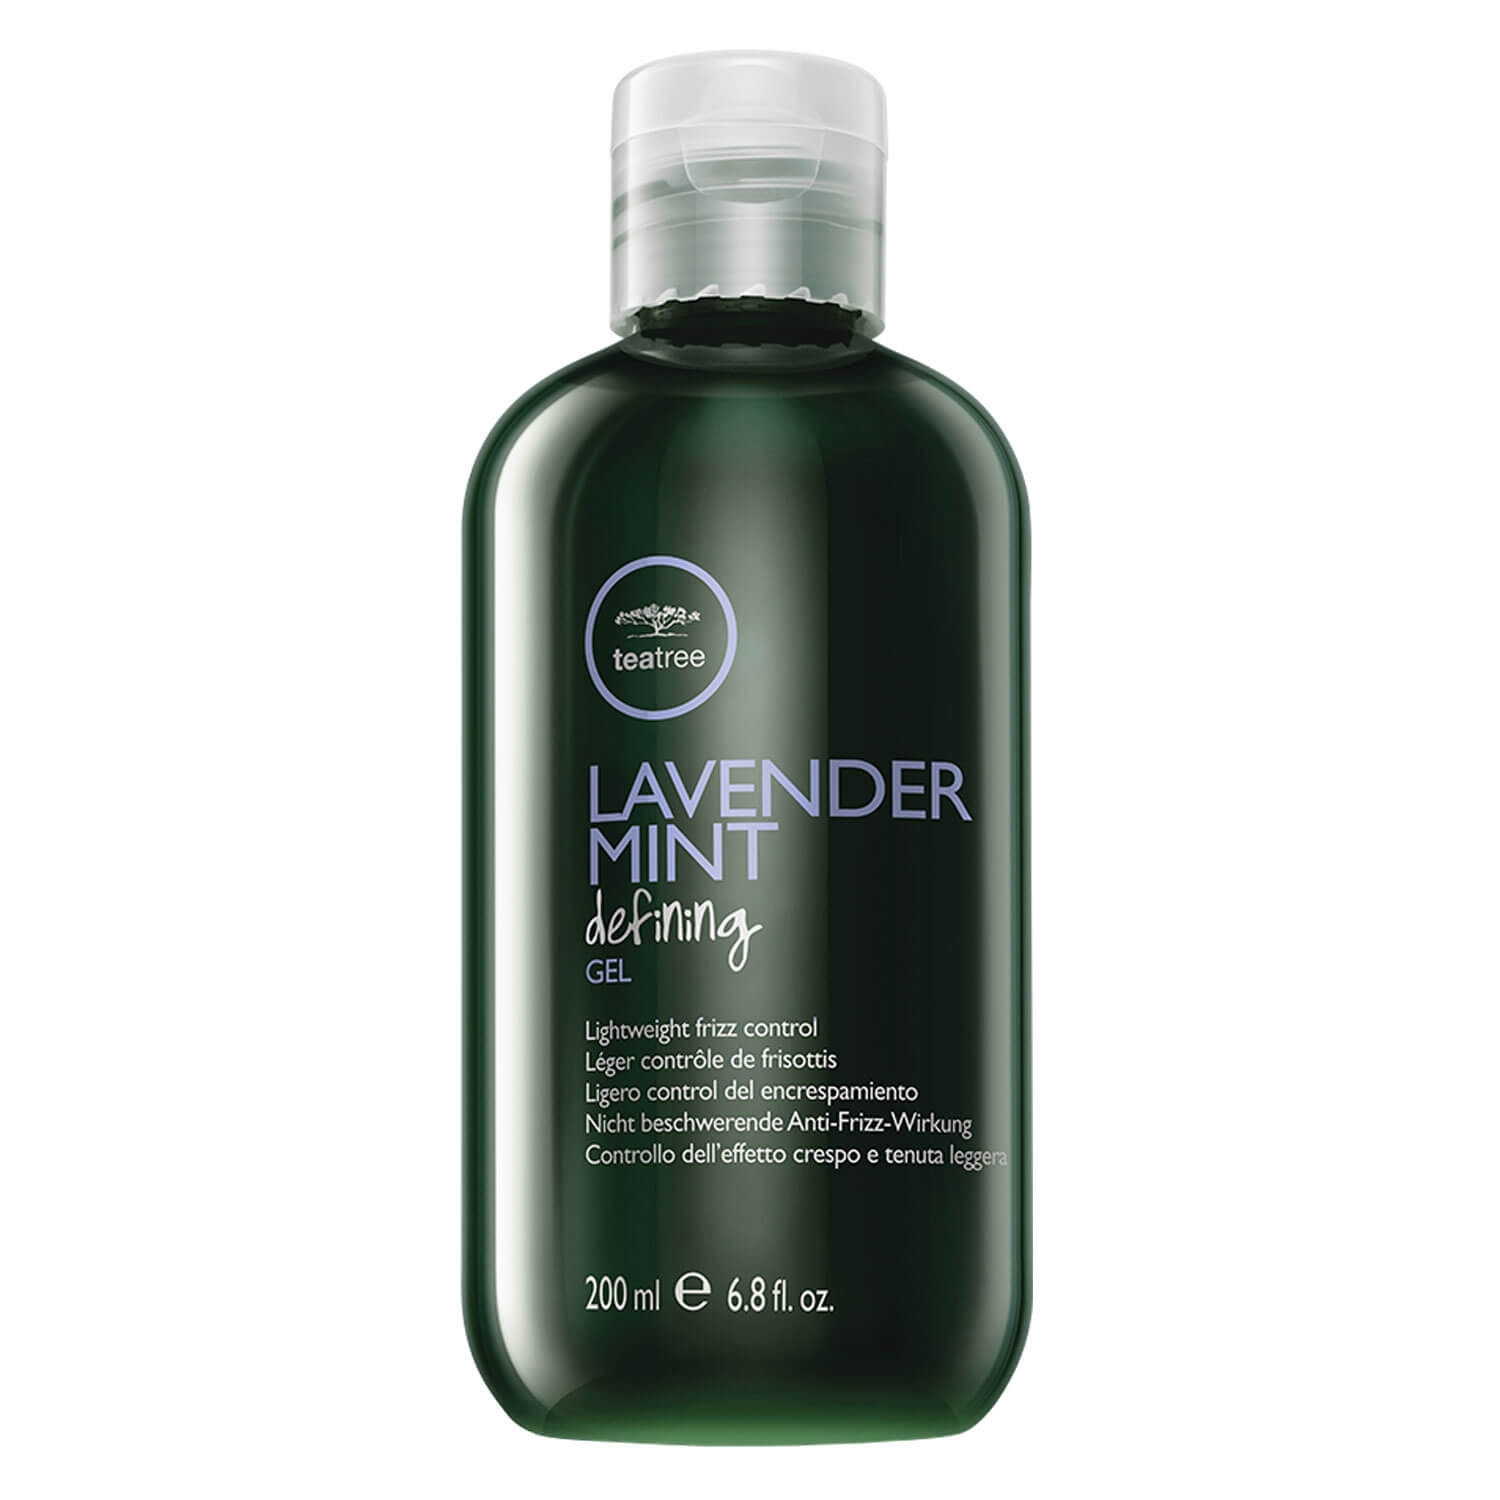 Product image from Tea Tree Lavender Mint - Defining Gel